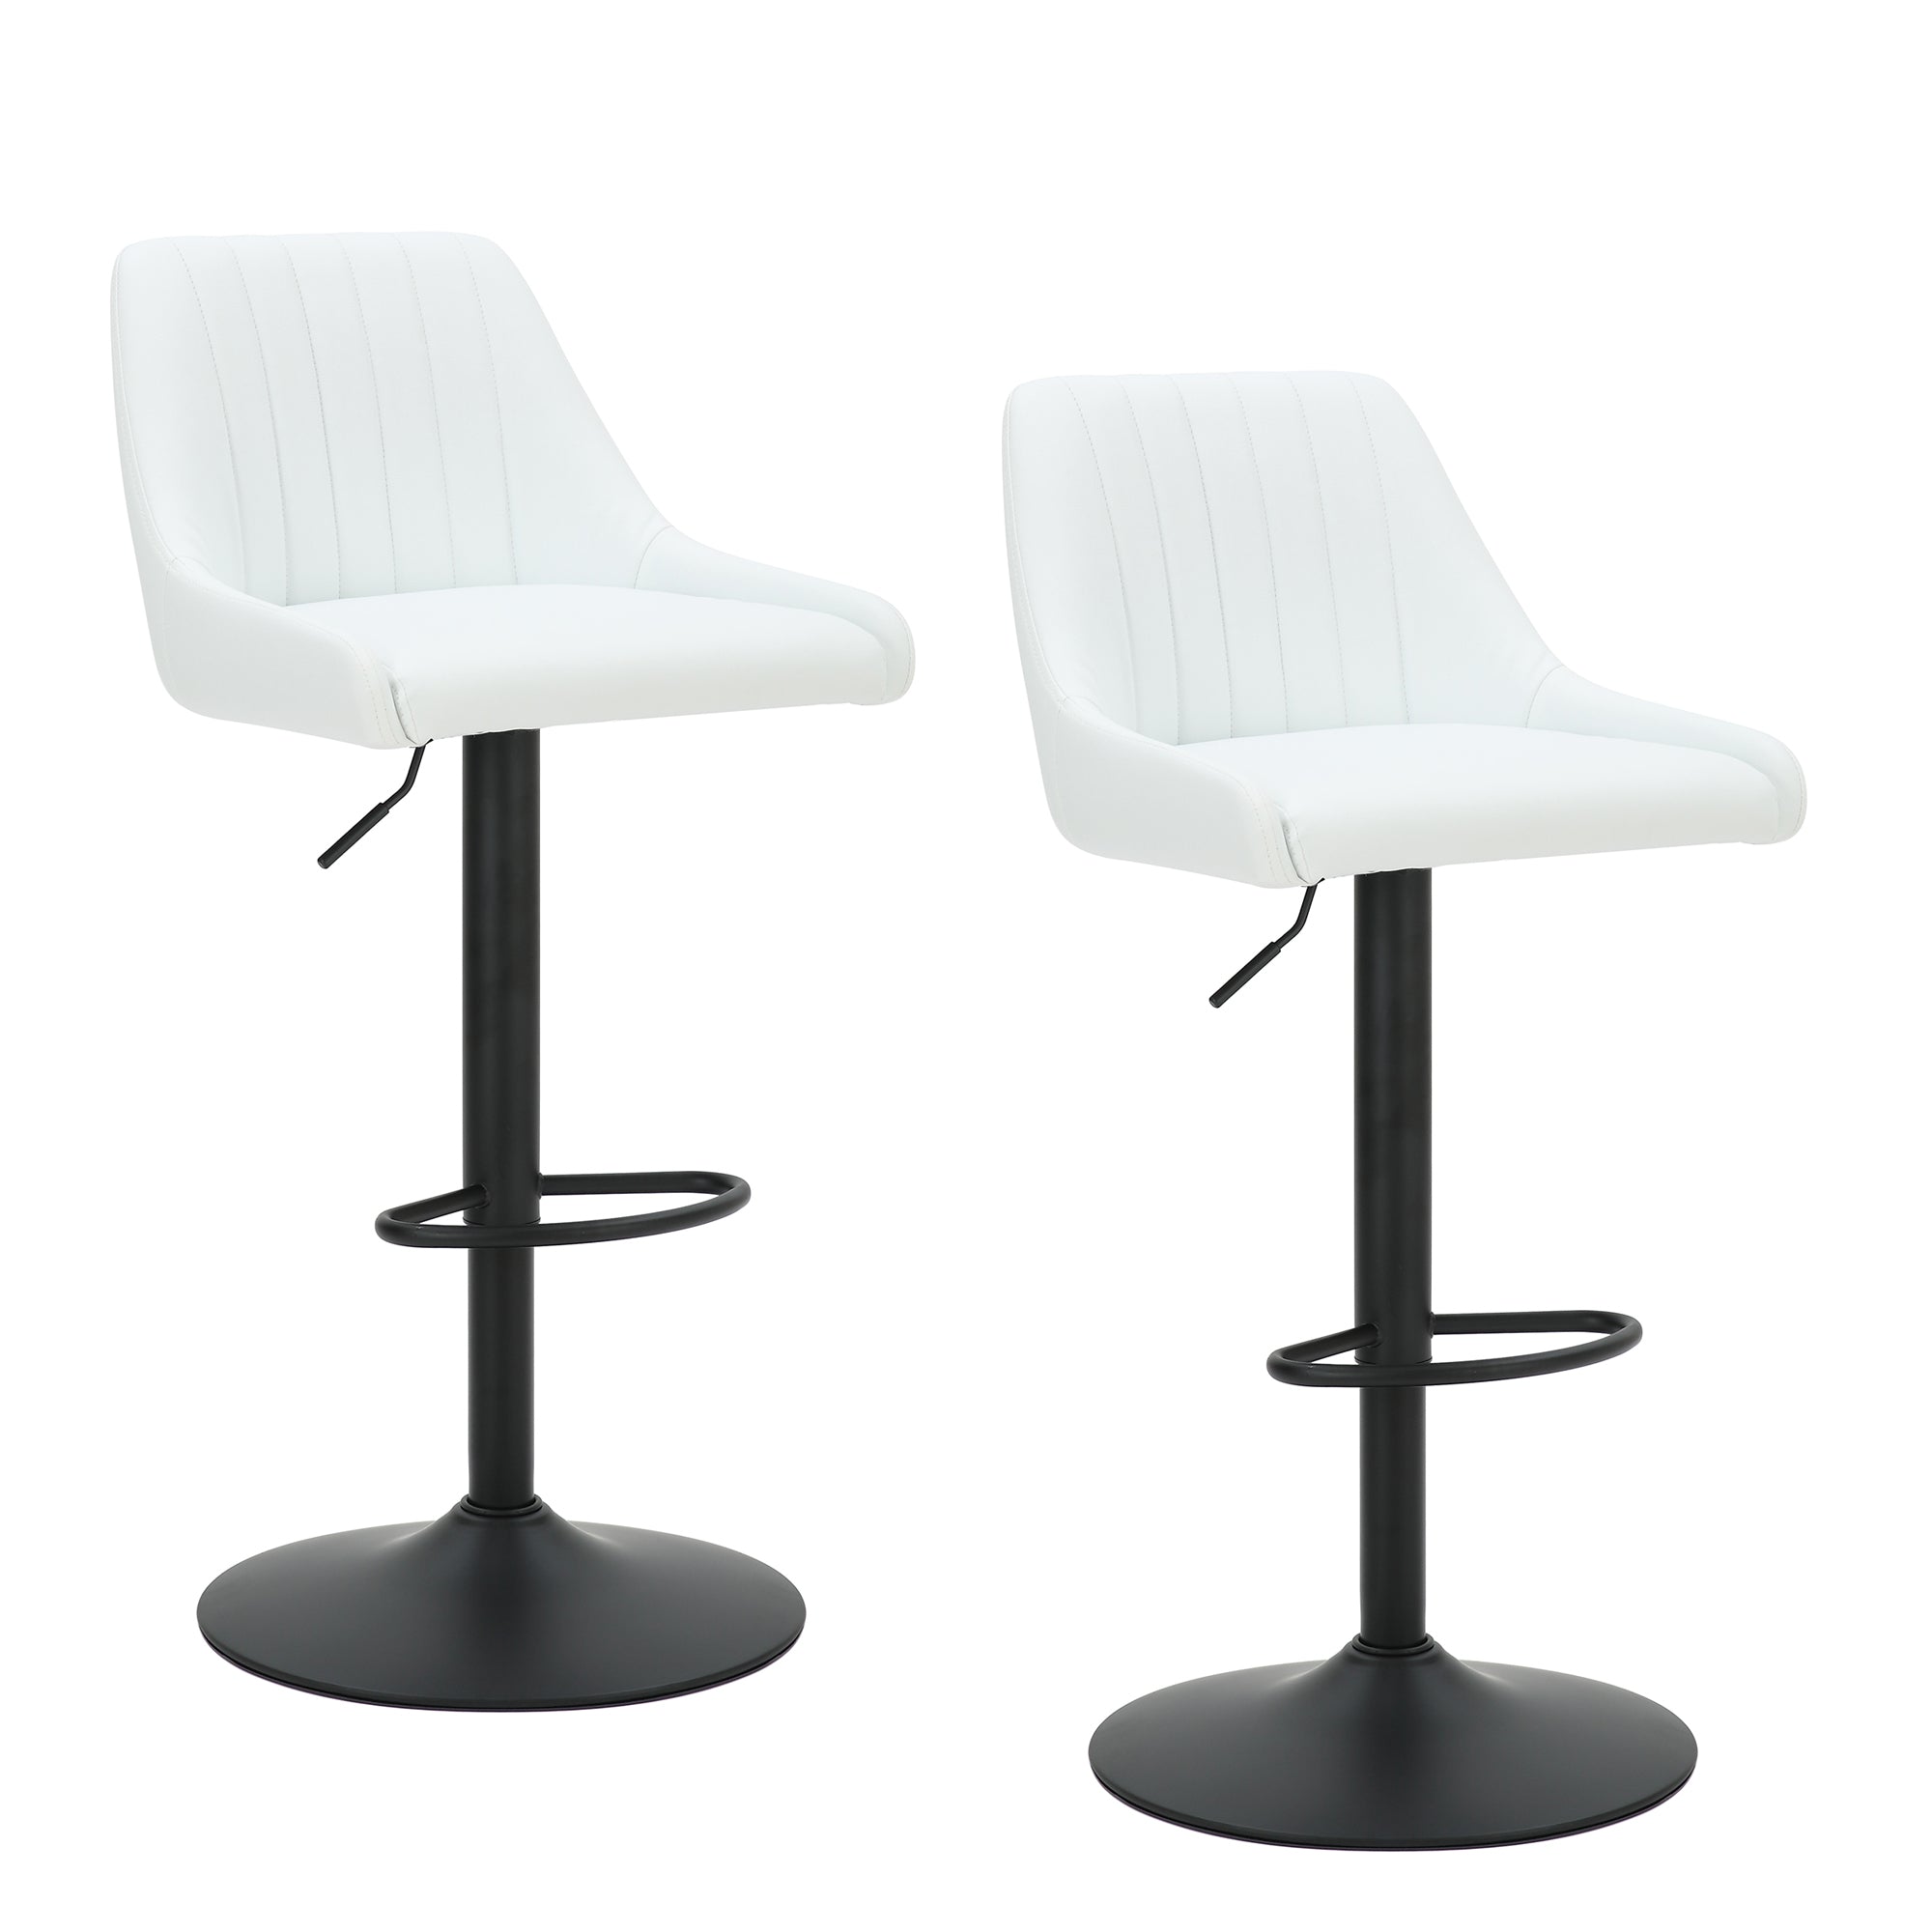 Kron Adjustable Height Air-Lift Swivel Stool, Set of 2, in White Faux Leather 203-574PUWT